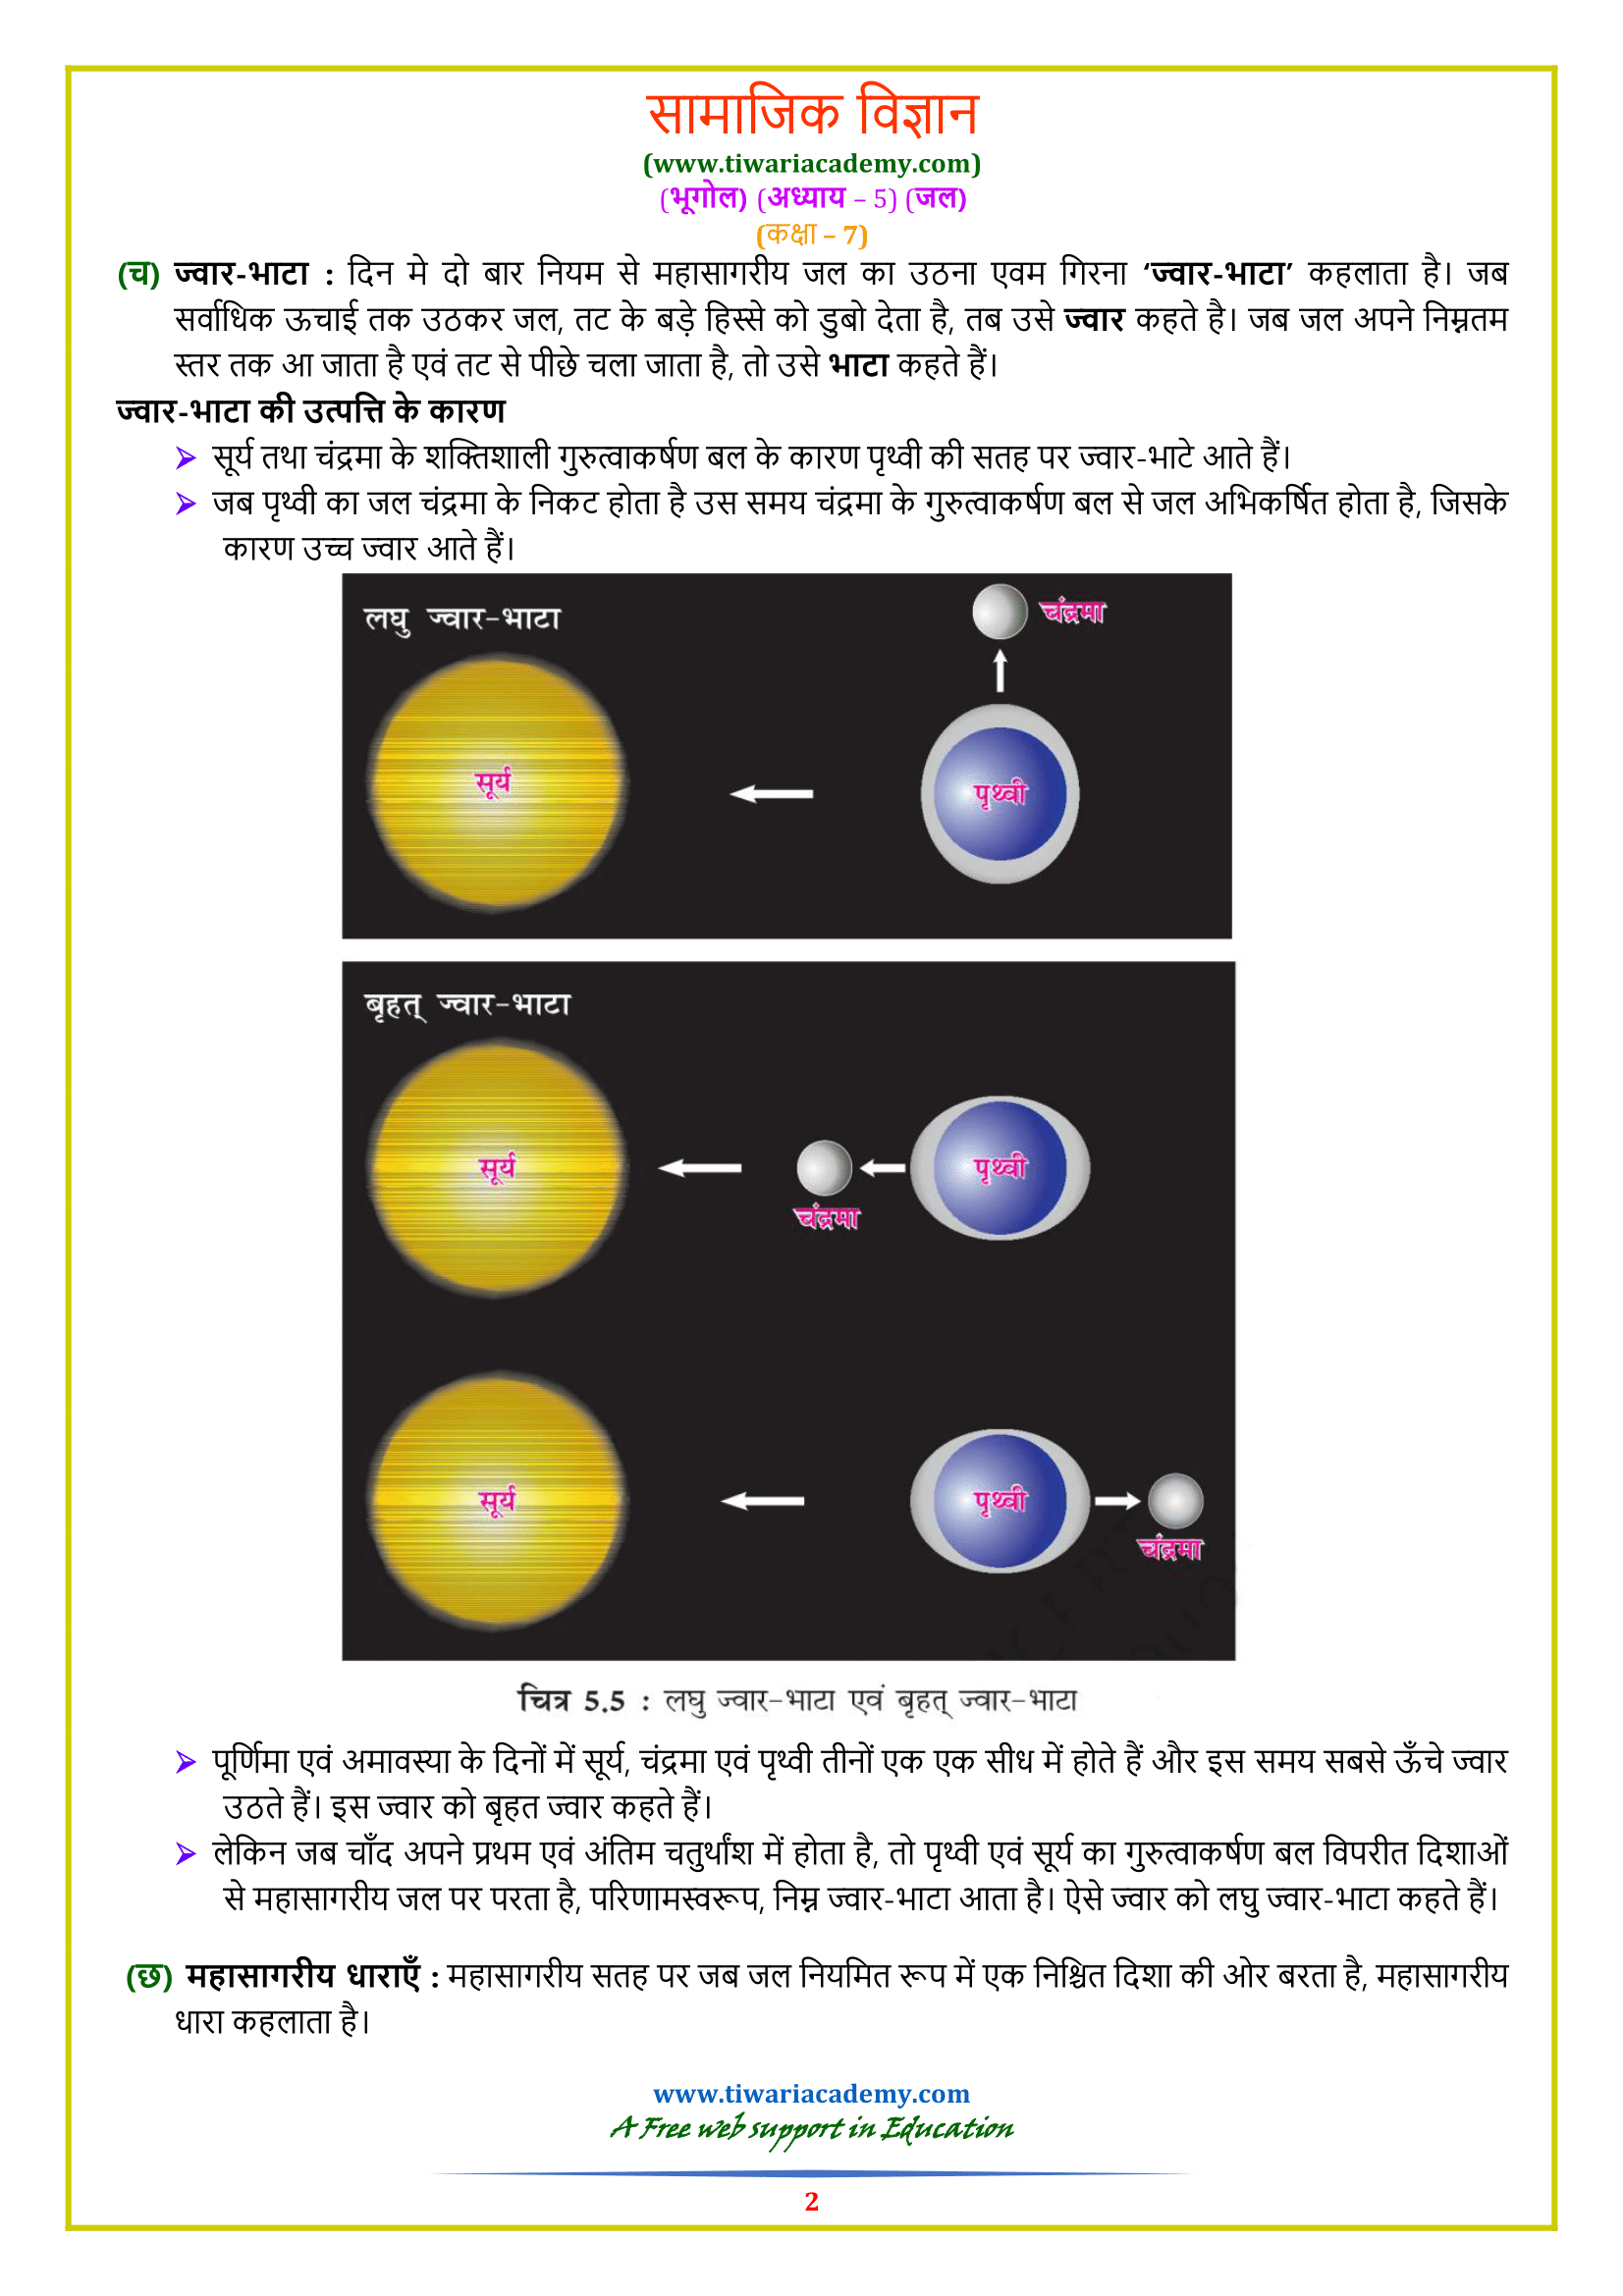 NCERT Solutions for Class 7 Geography chapter 5 in Hindi